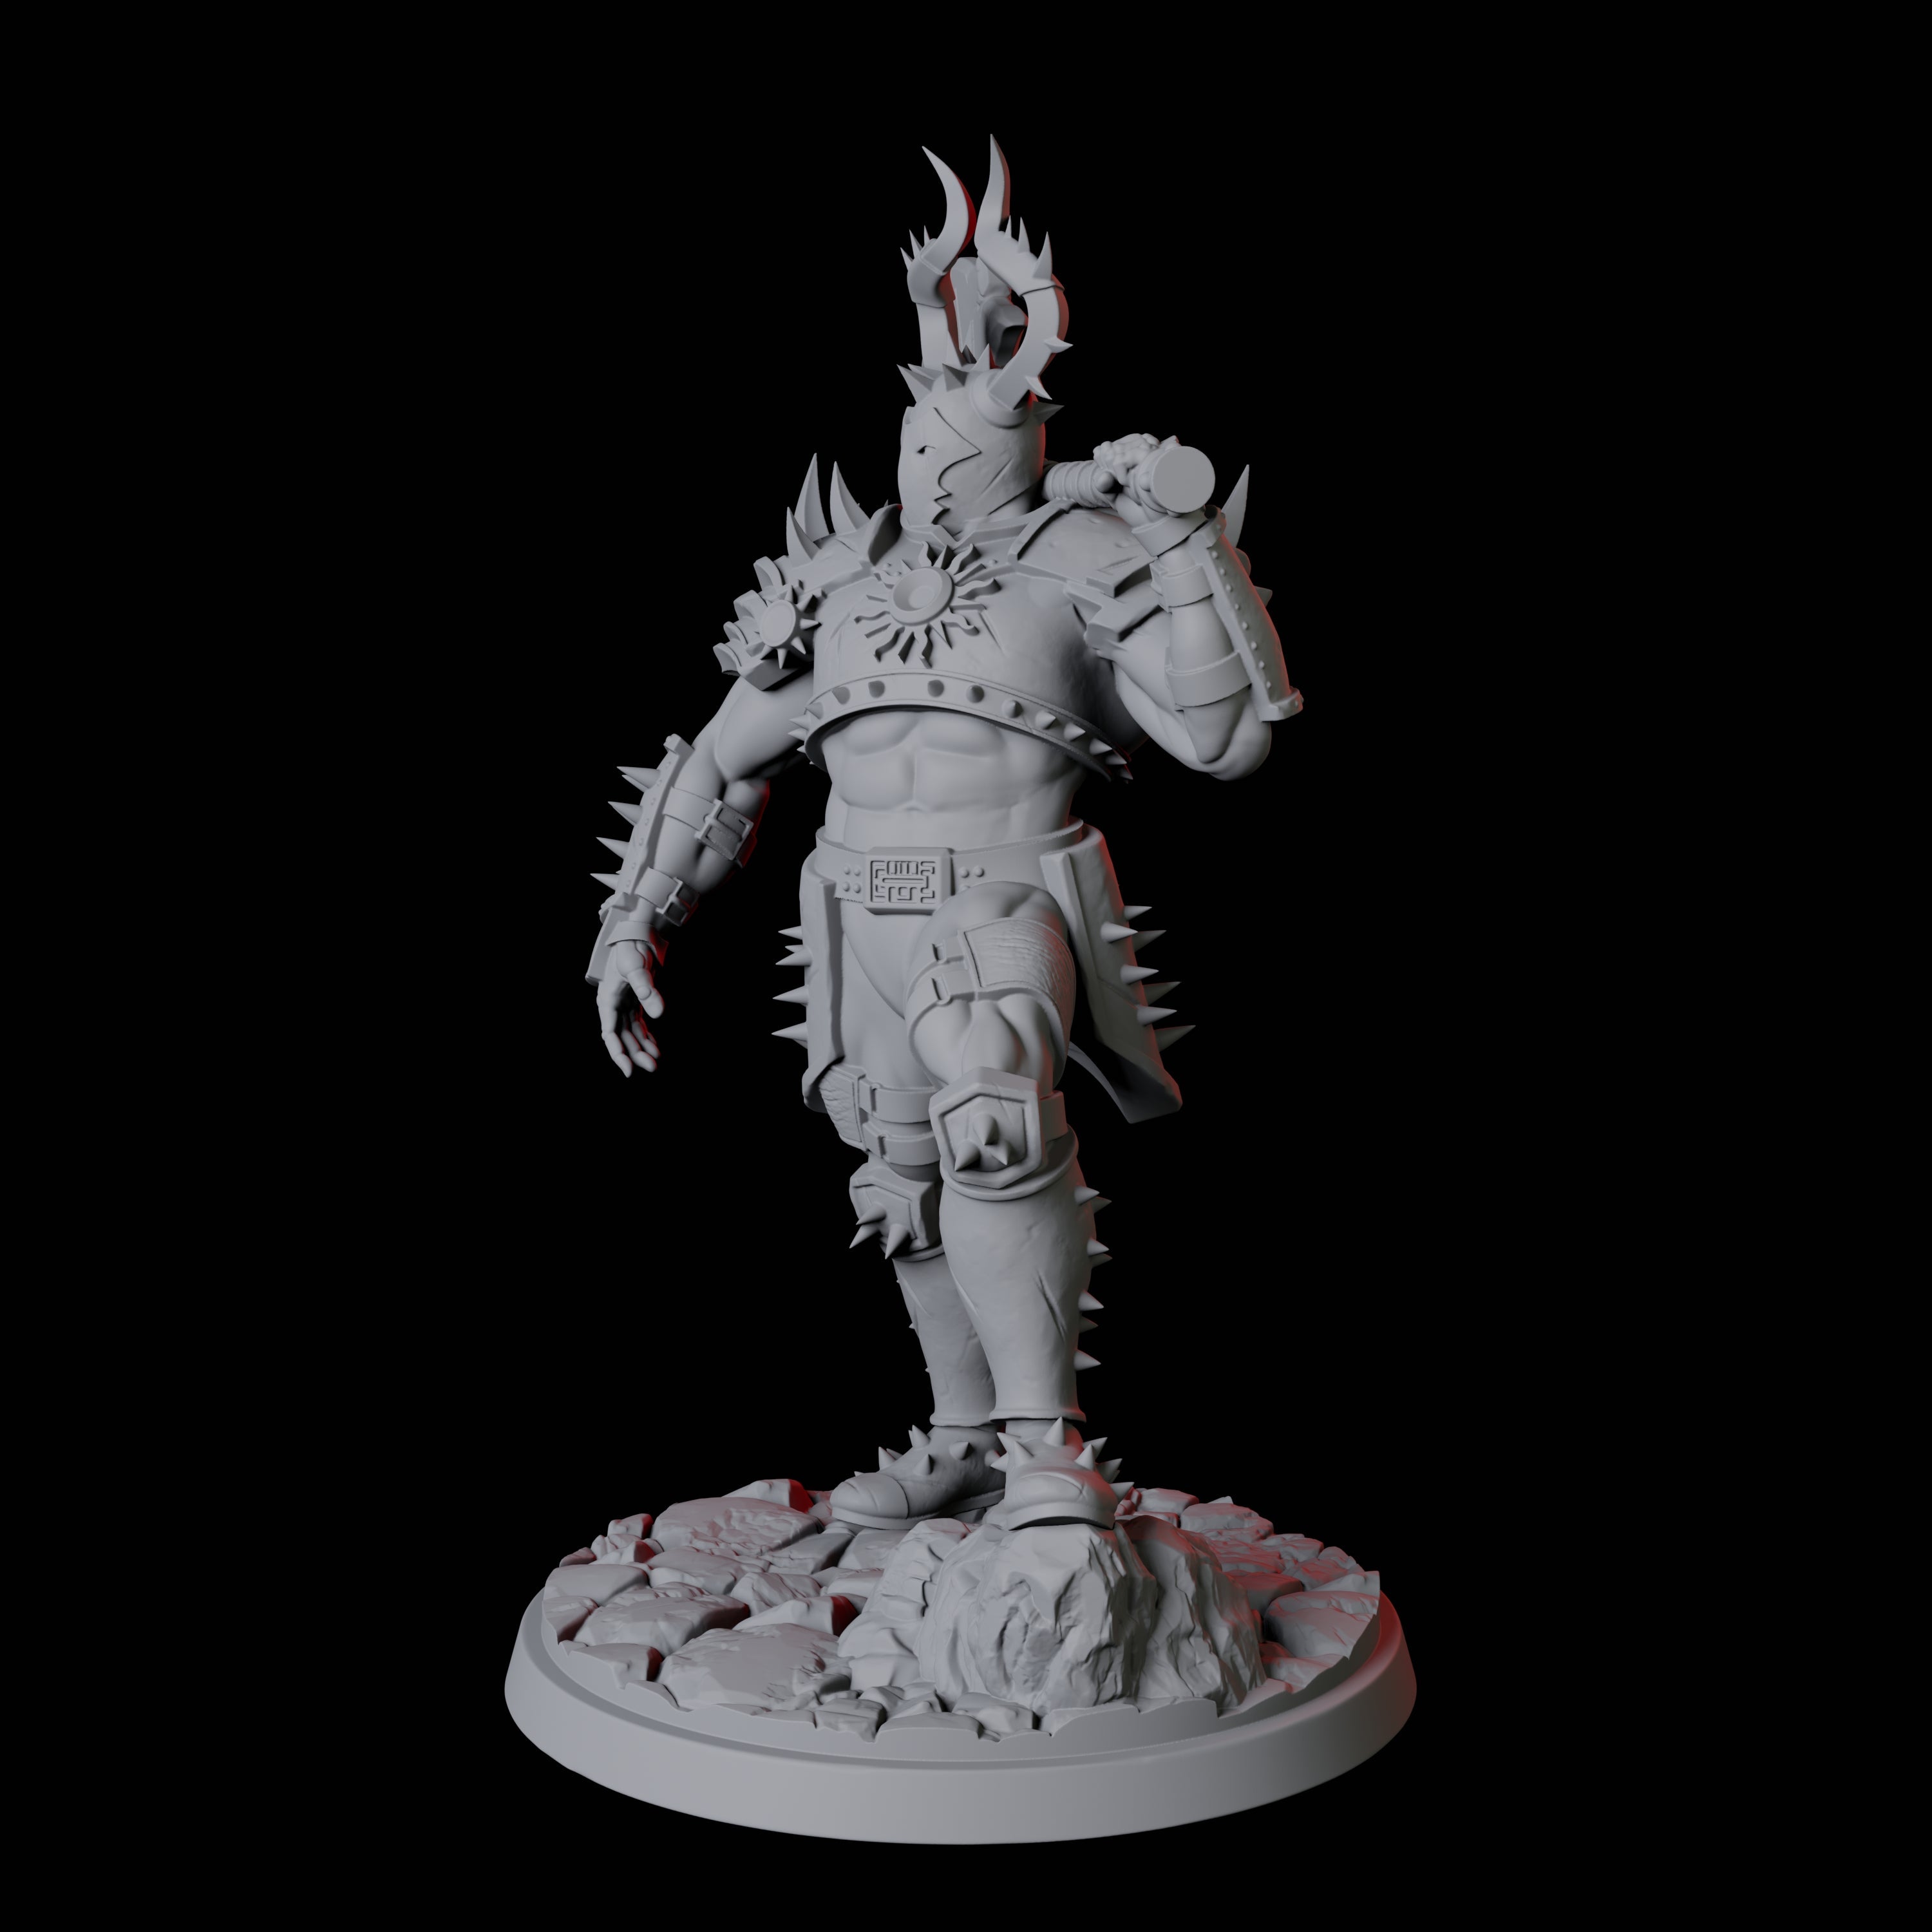 Spiked Armour Champion Miniature for Dungeons and Dragons, Pathfinder or other TTRPGs